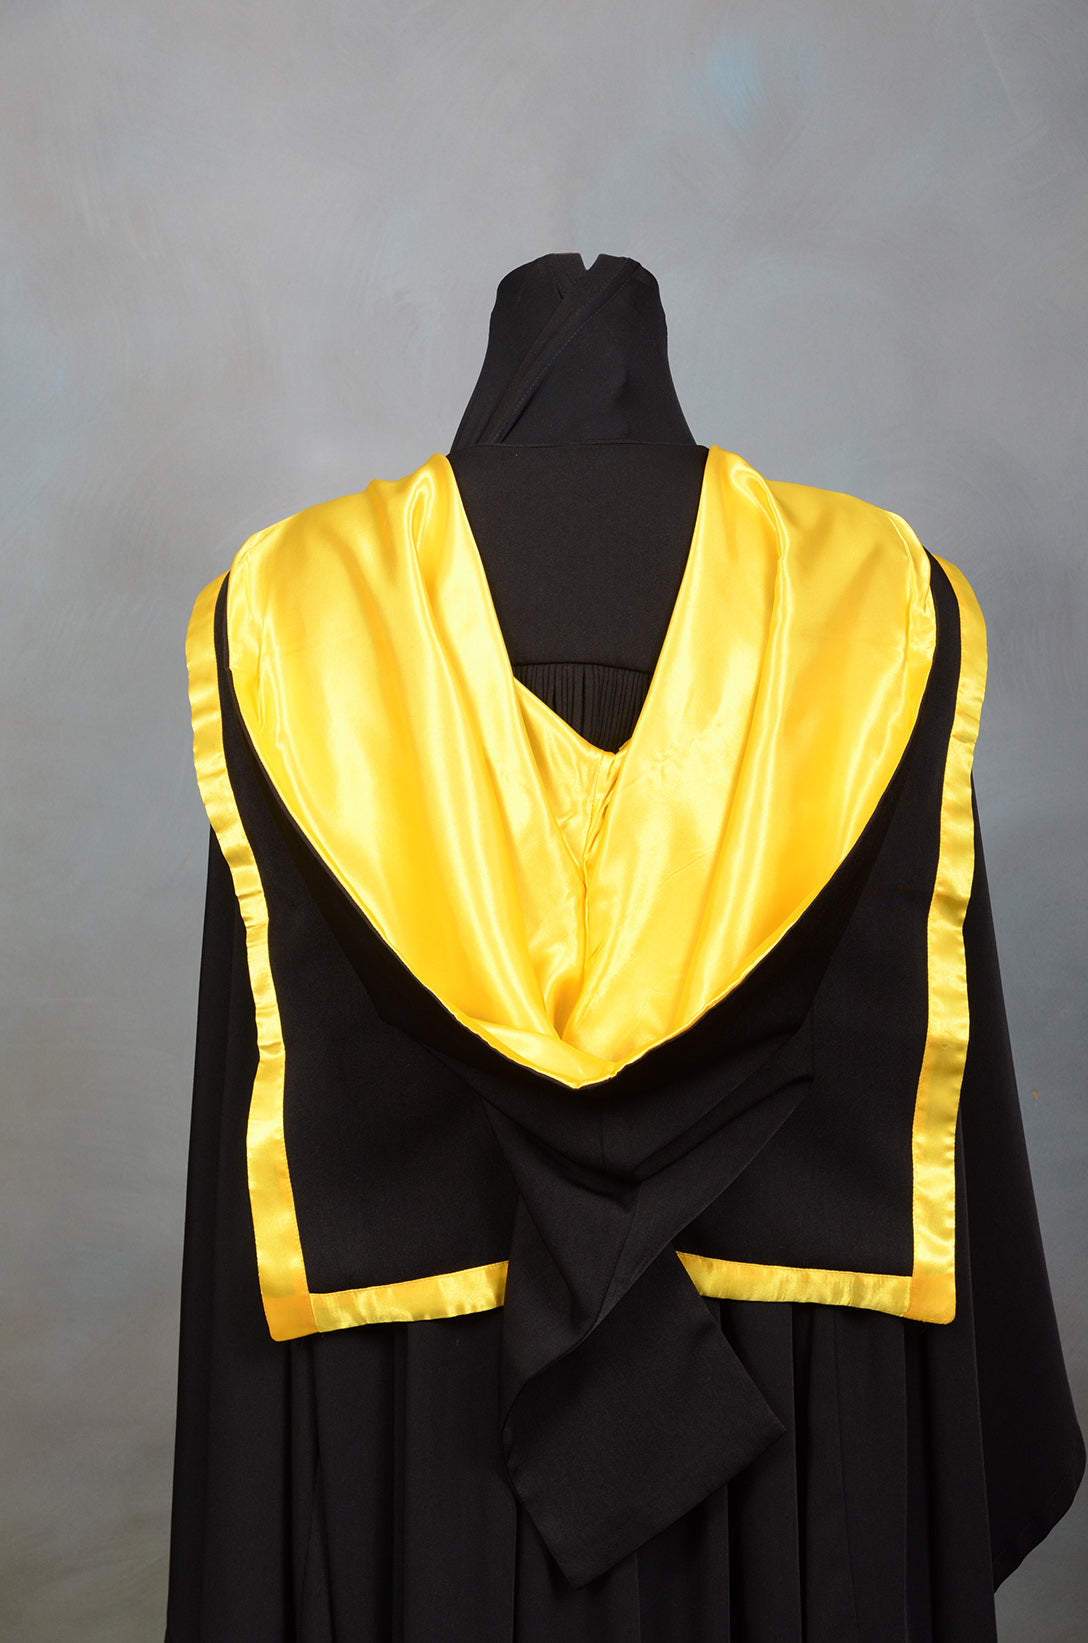 Gown and hood hire